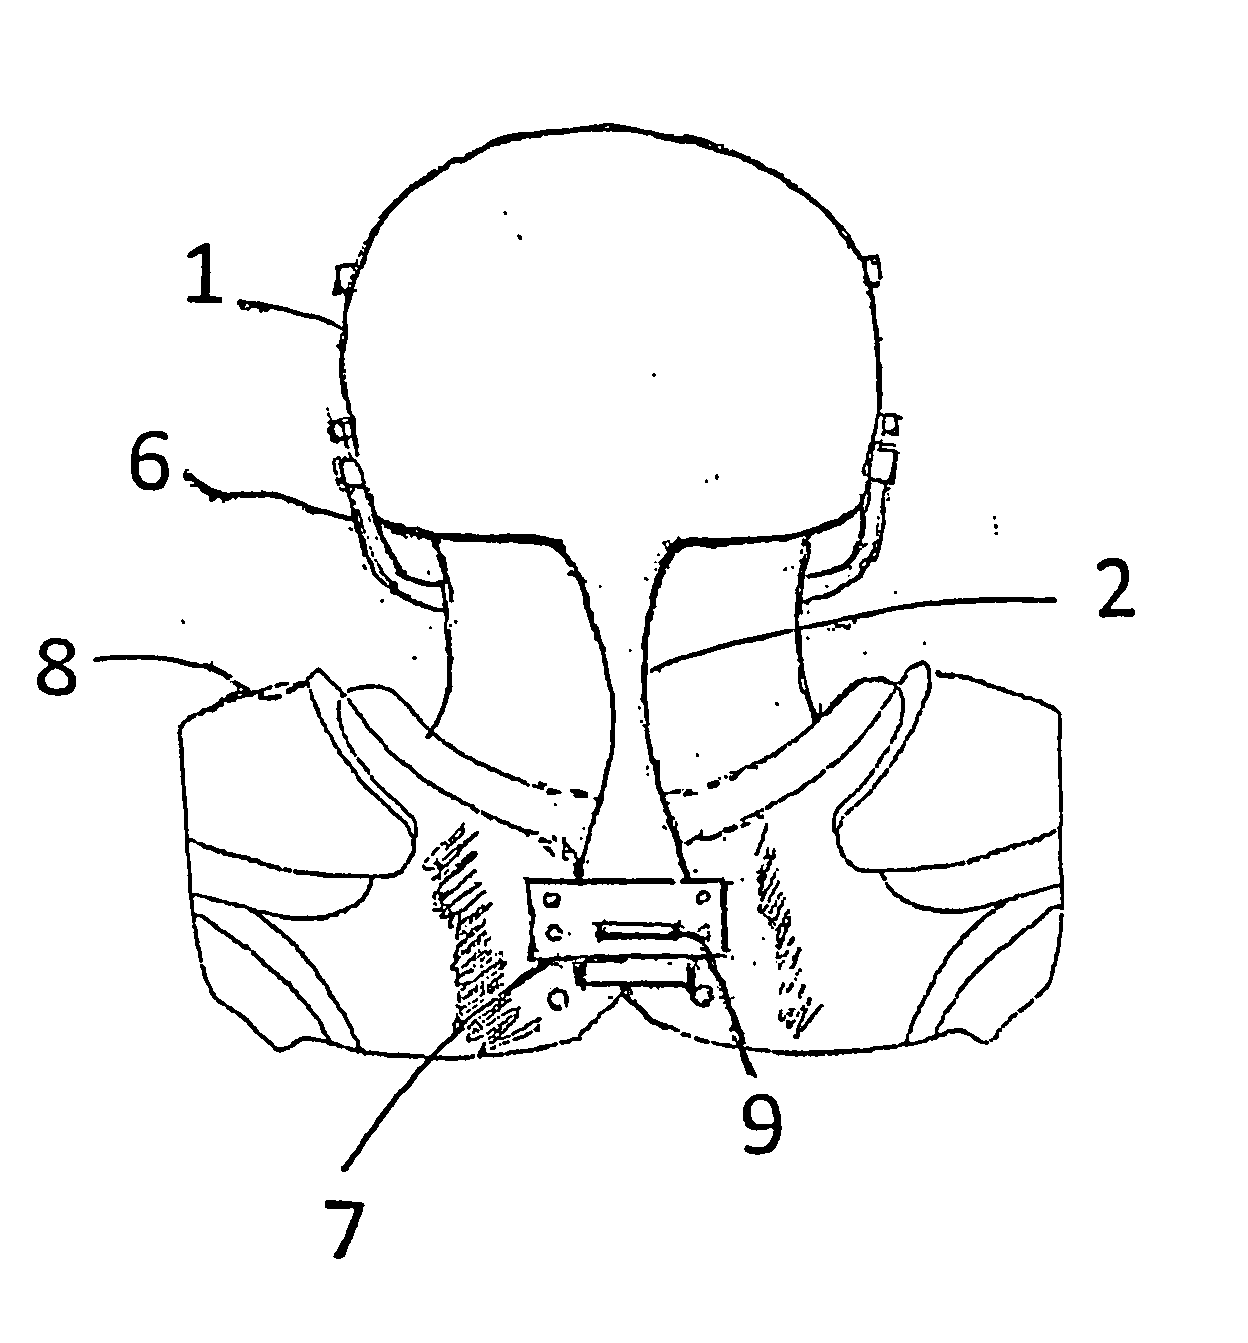 Helmet extension connected to shoulder pad to prevent brain and spine injuries